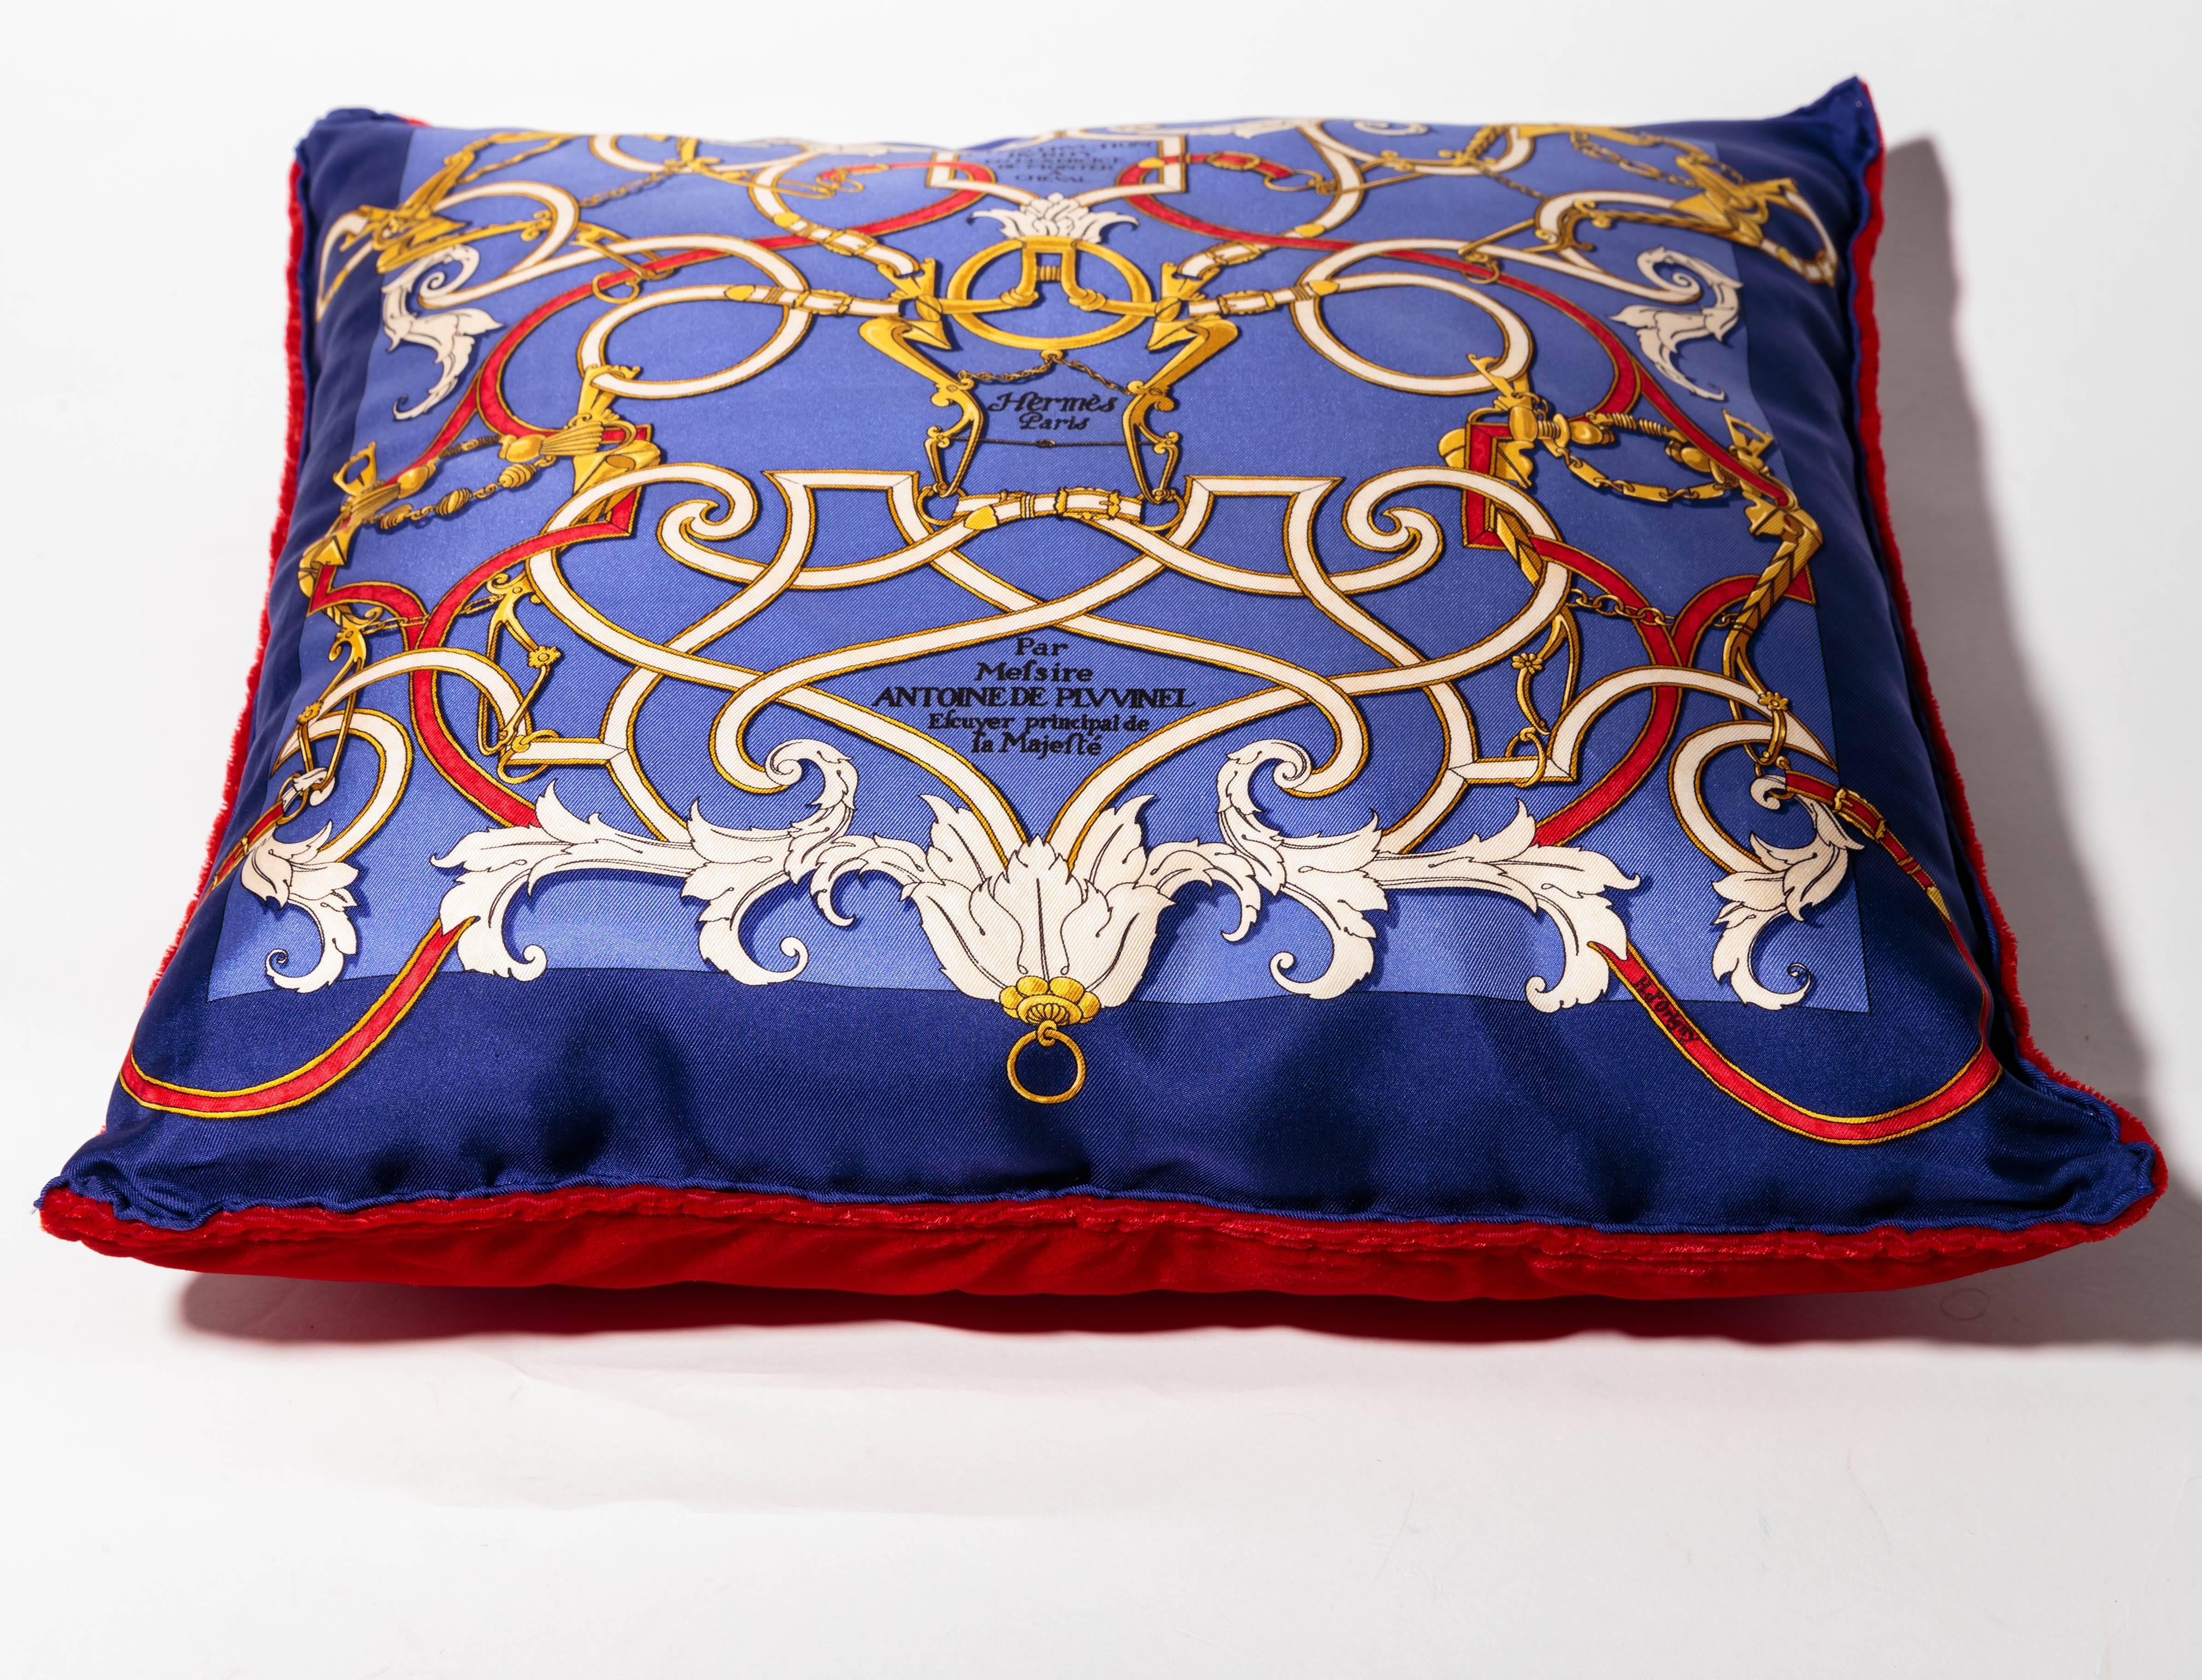 Hermes Pillow Made from Hermes Navy Silk Jacquard L'Instruction du Roy Scarf by Henri d'Origny 
This pillow is backed in red velvet . Condition is excellent.
Measures 40 x 40 cm